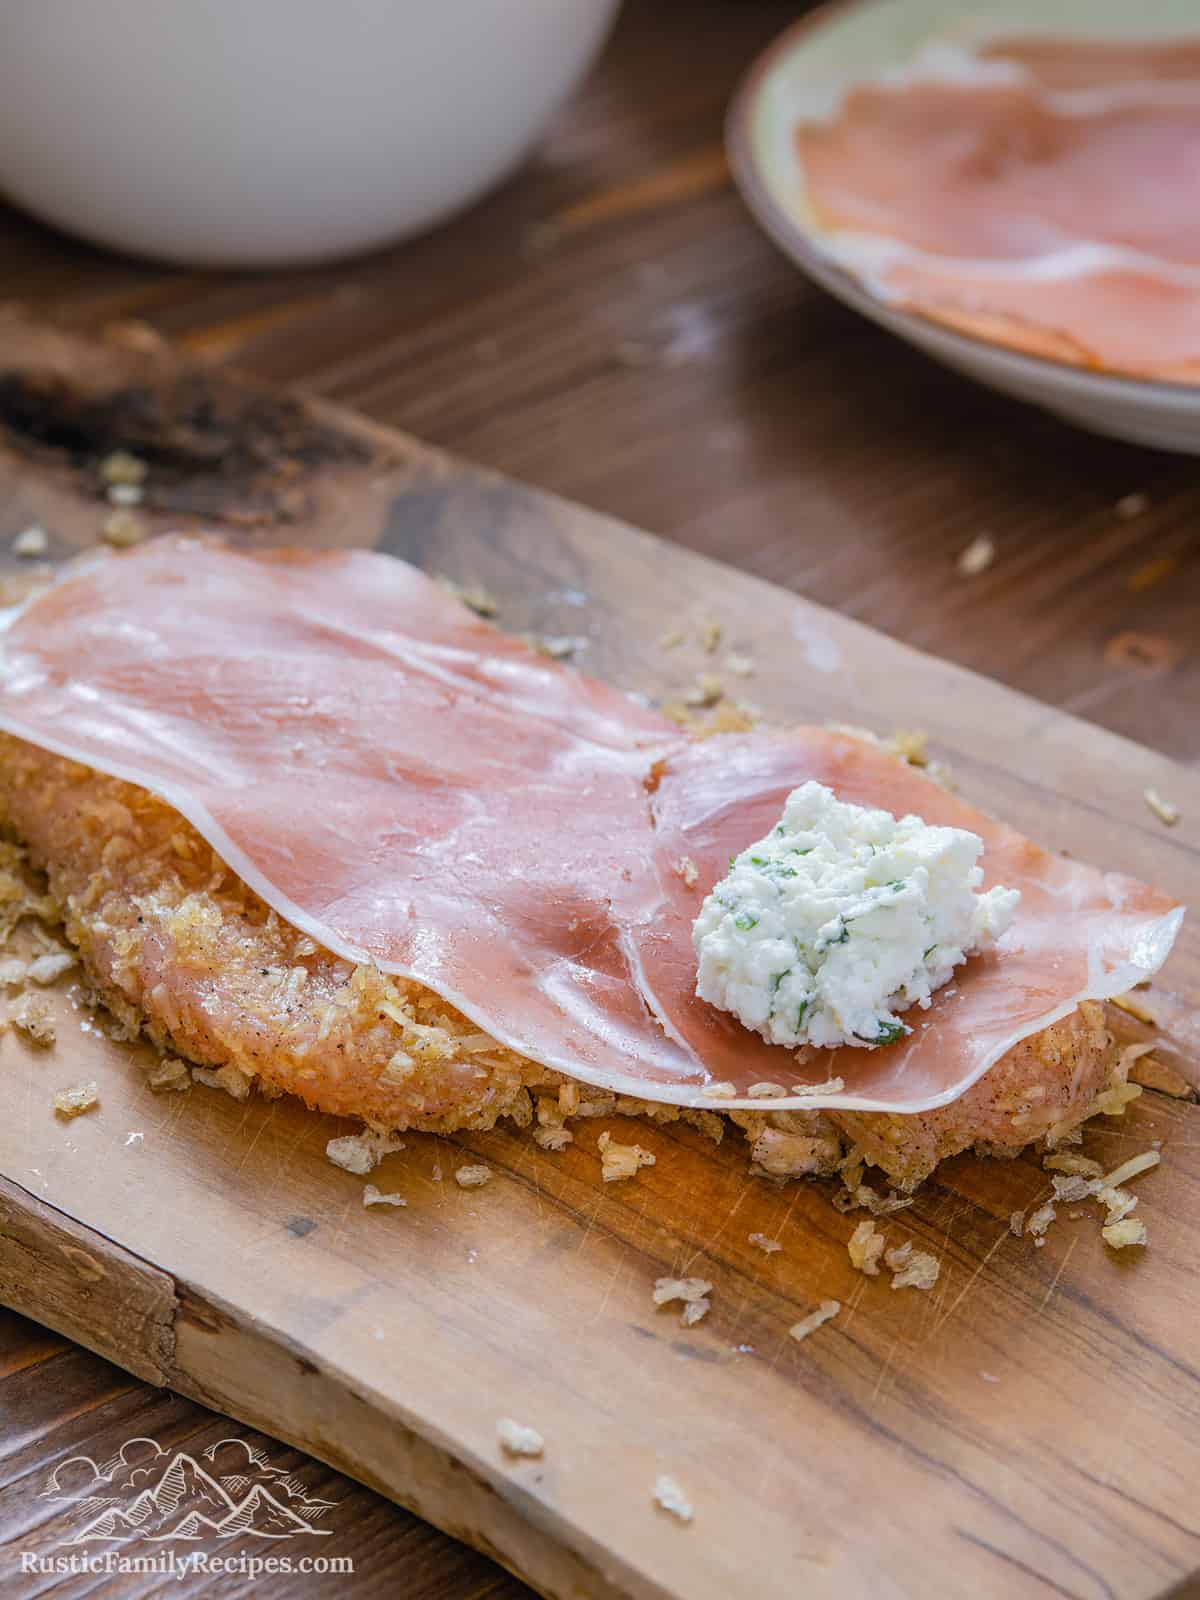 Breaded chicken topped with prosciutto and ricotta filling